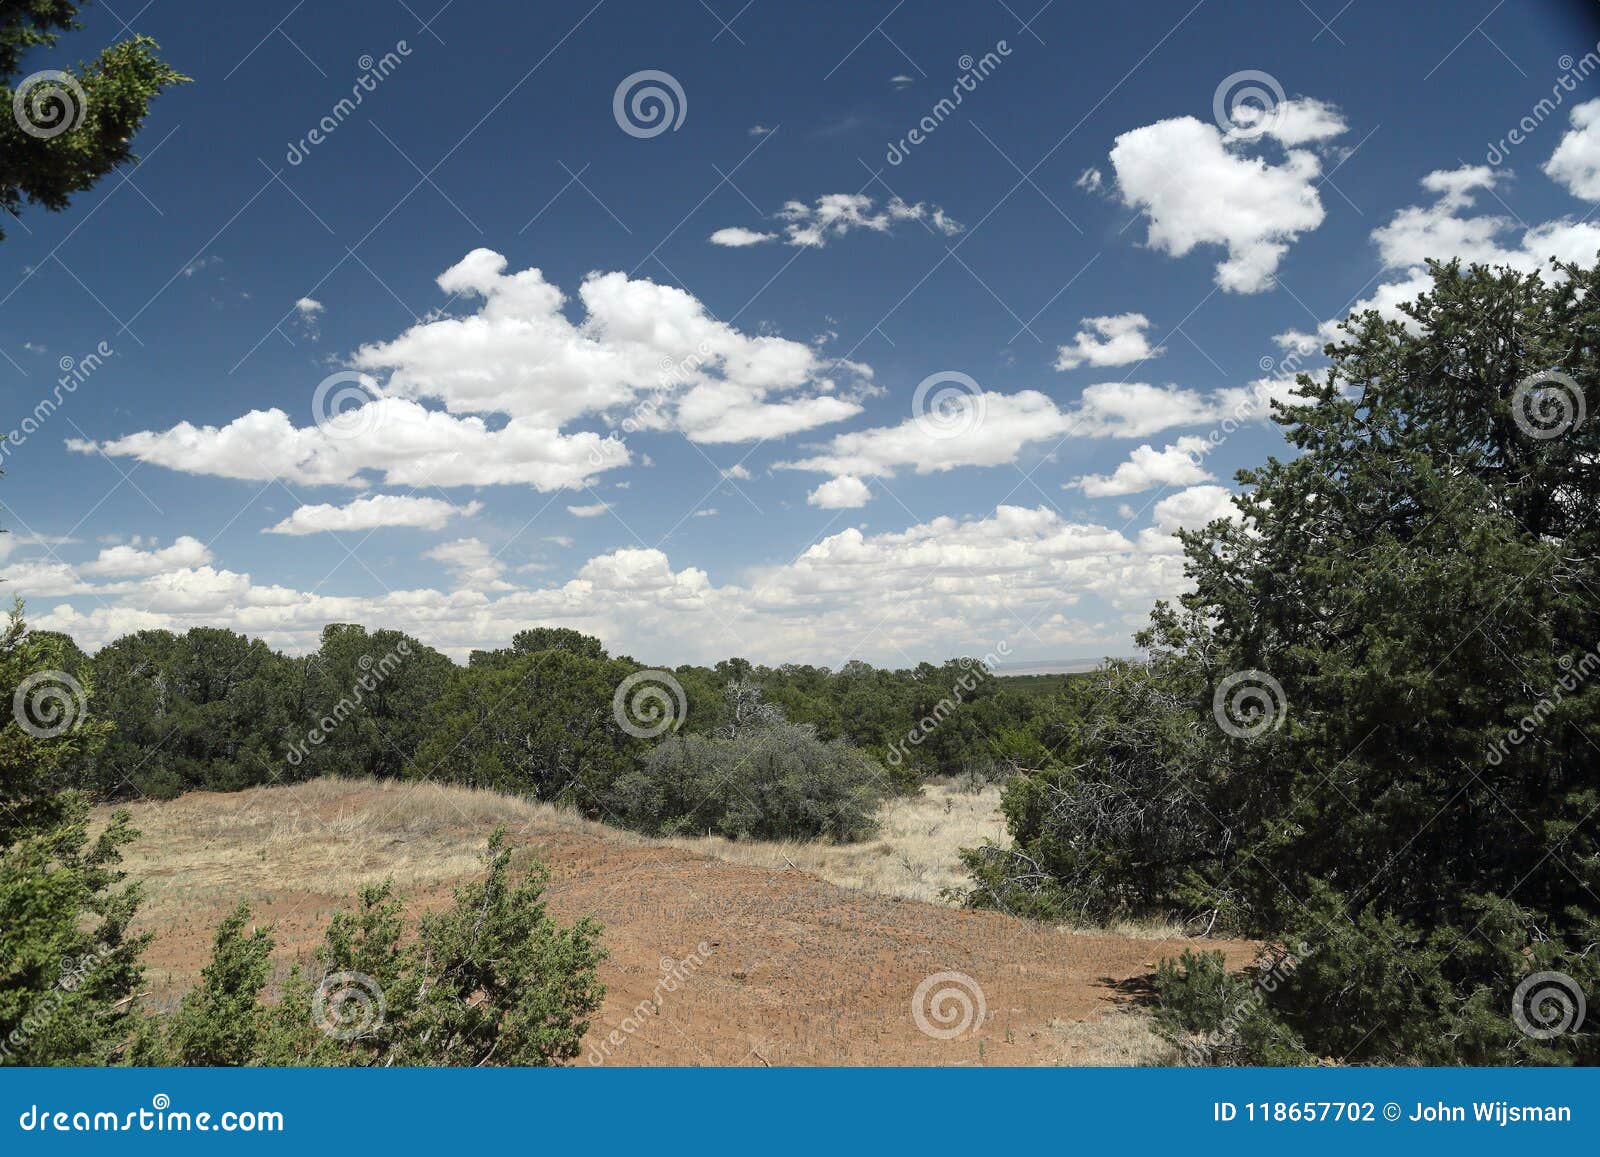 landscape with shrubs blue sky and cloud with a view of the high desert from tijeras